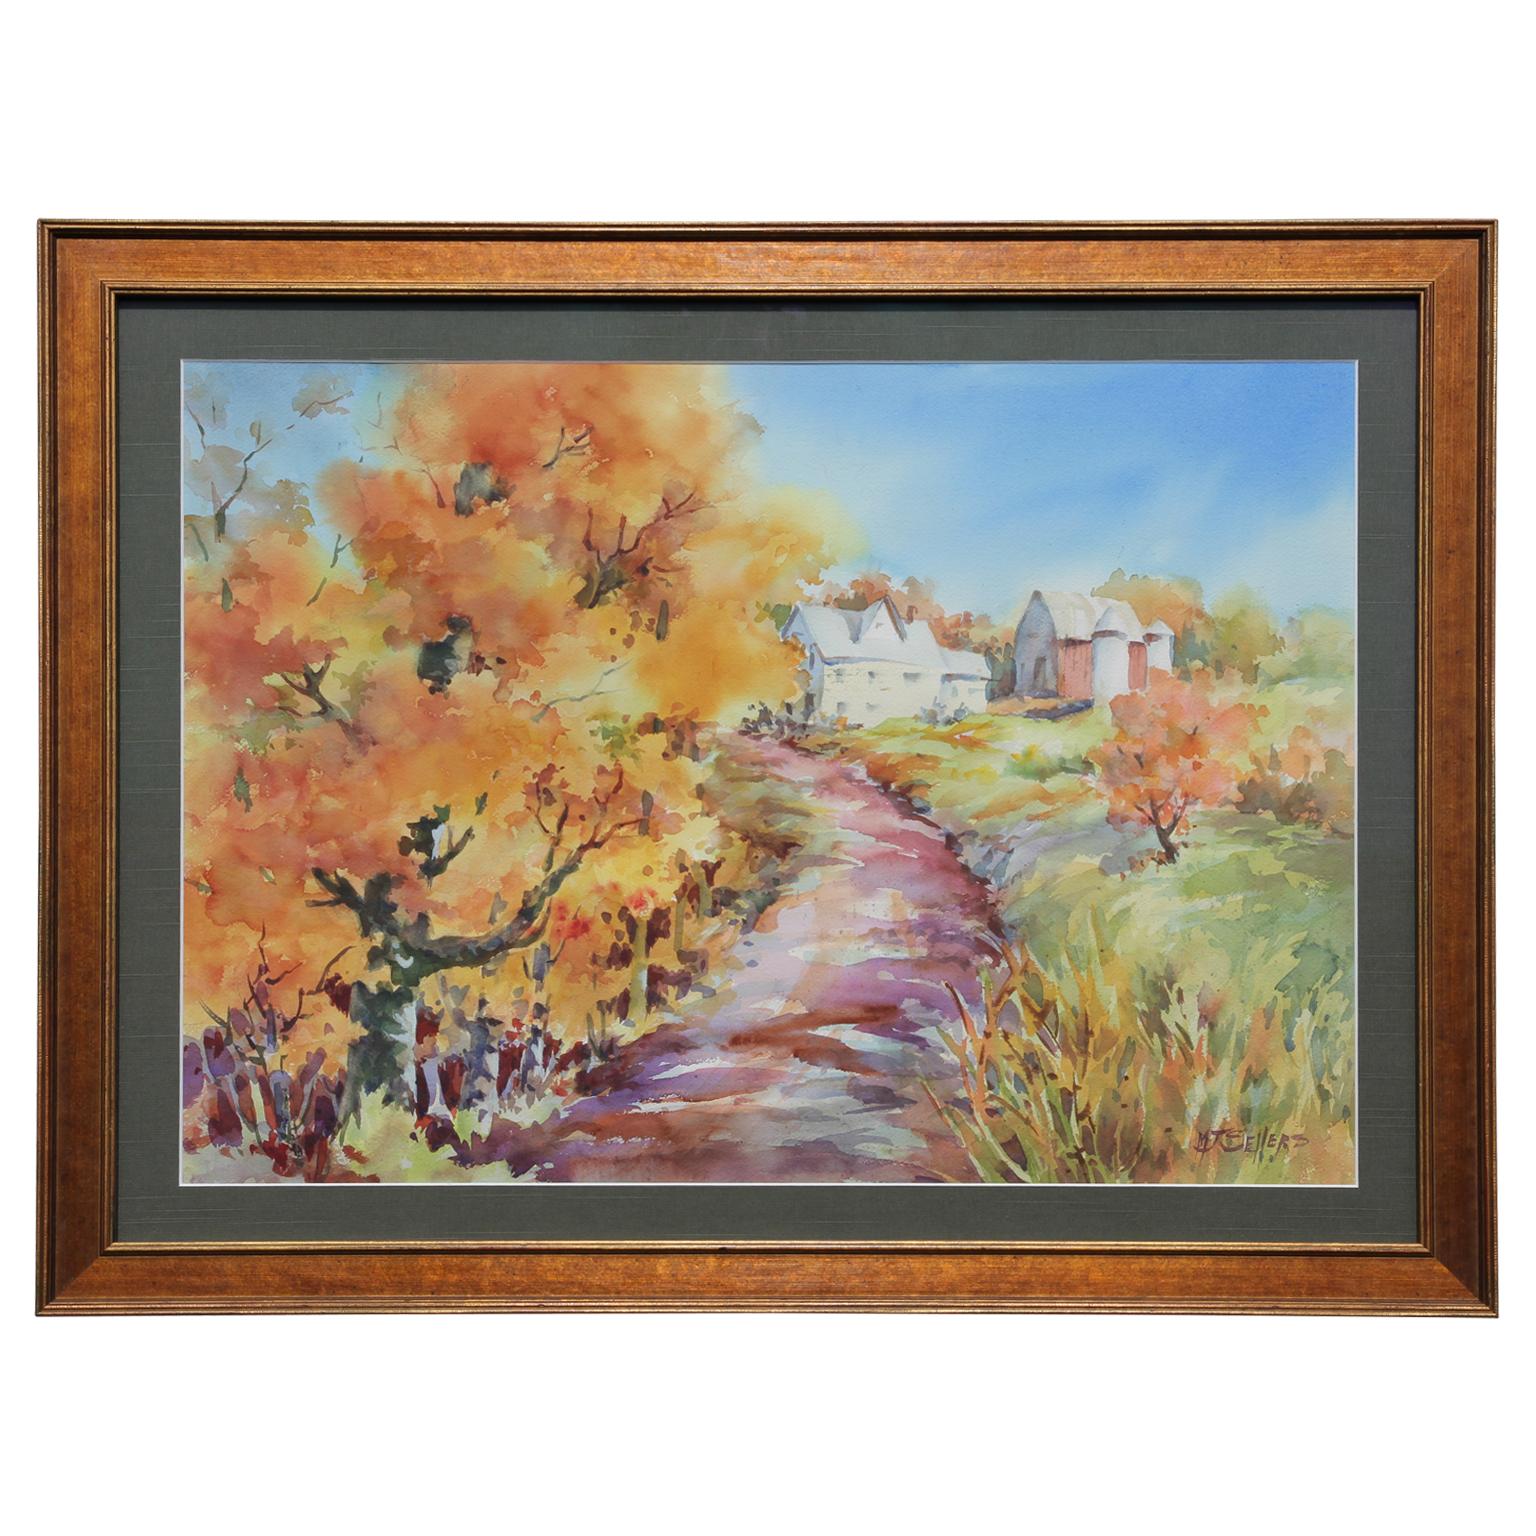 Mabel Sellers Landscape Painting - Untitled Italian Rural Fall Landscape Watercolor Painting